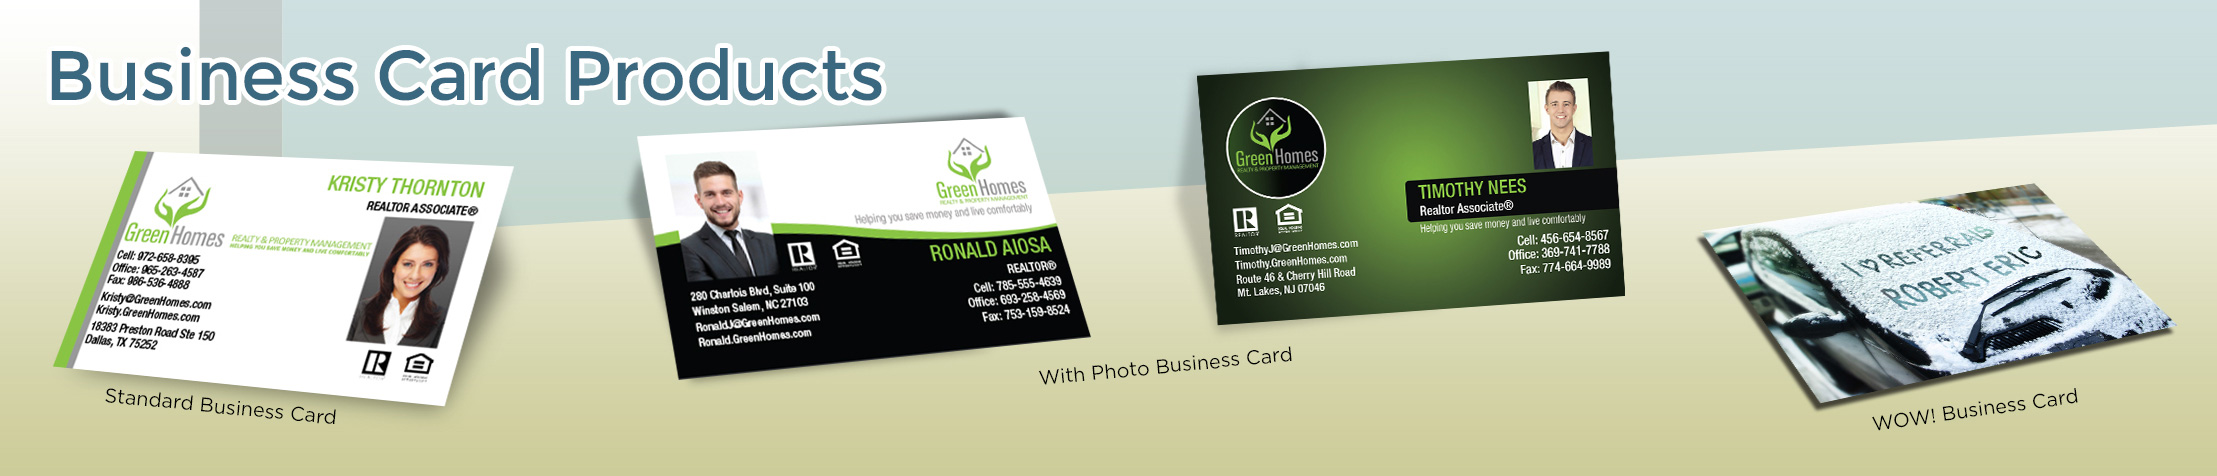 Green Homes Realtors Real Estate Business Card Products - Green Homes Realtors  - Unique, Custom Business Cards Printed on Quality Stock with Creative Designs for Realtors | BestPrintBuy.com